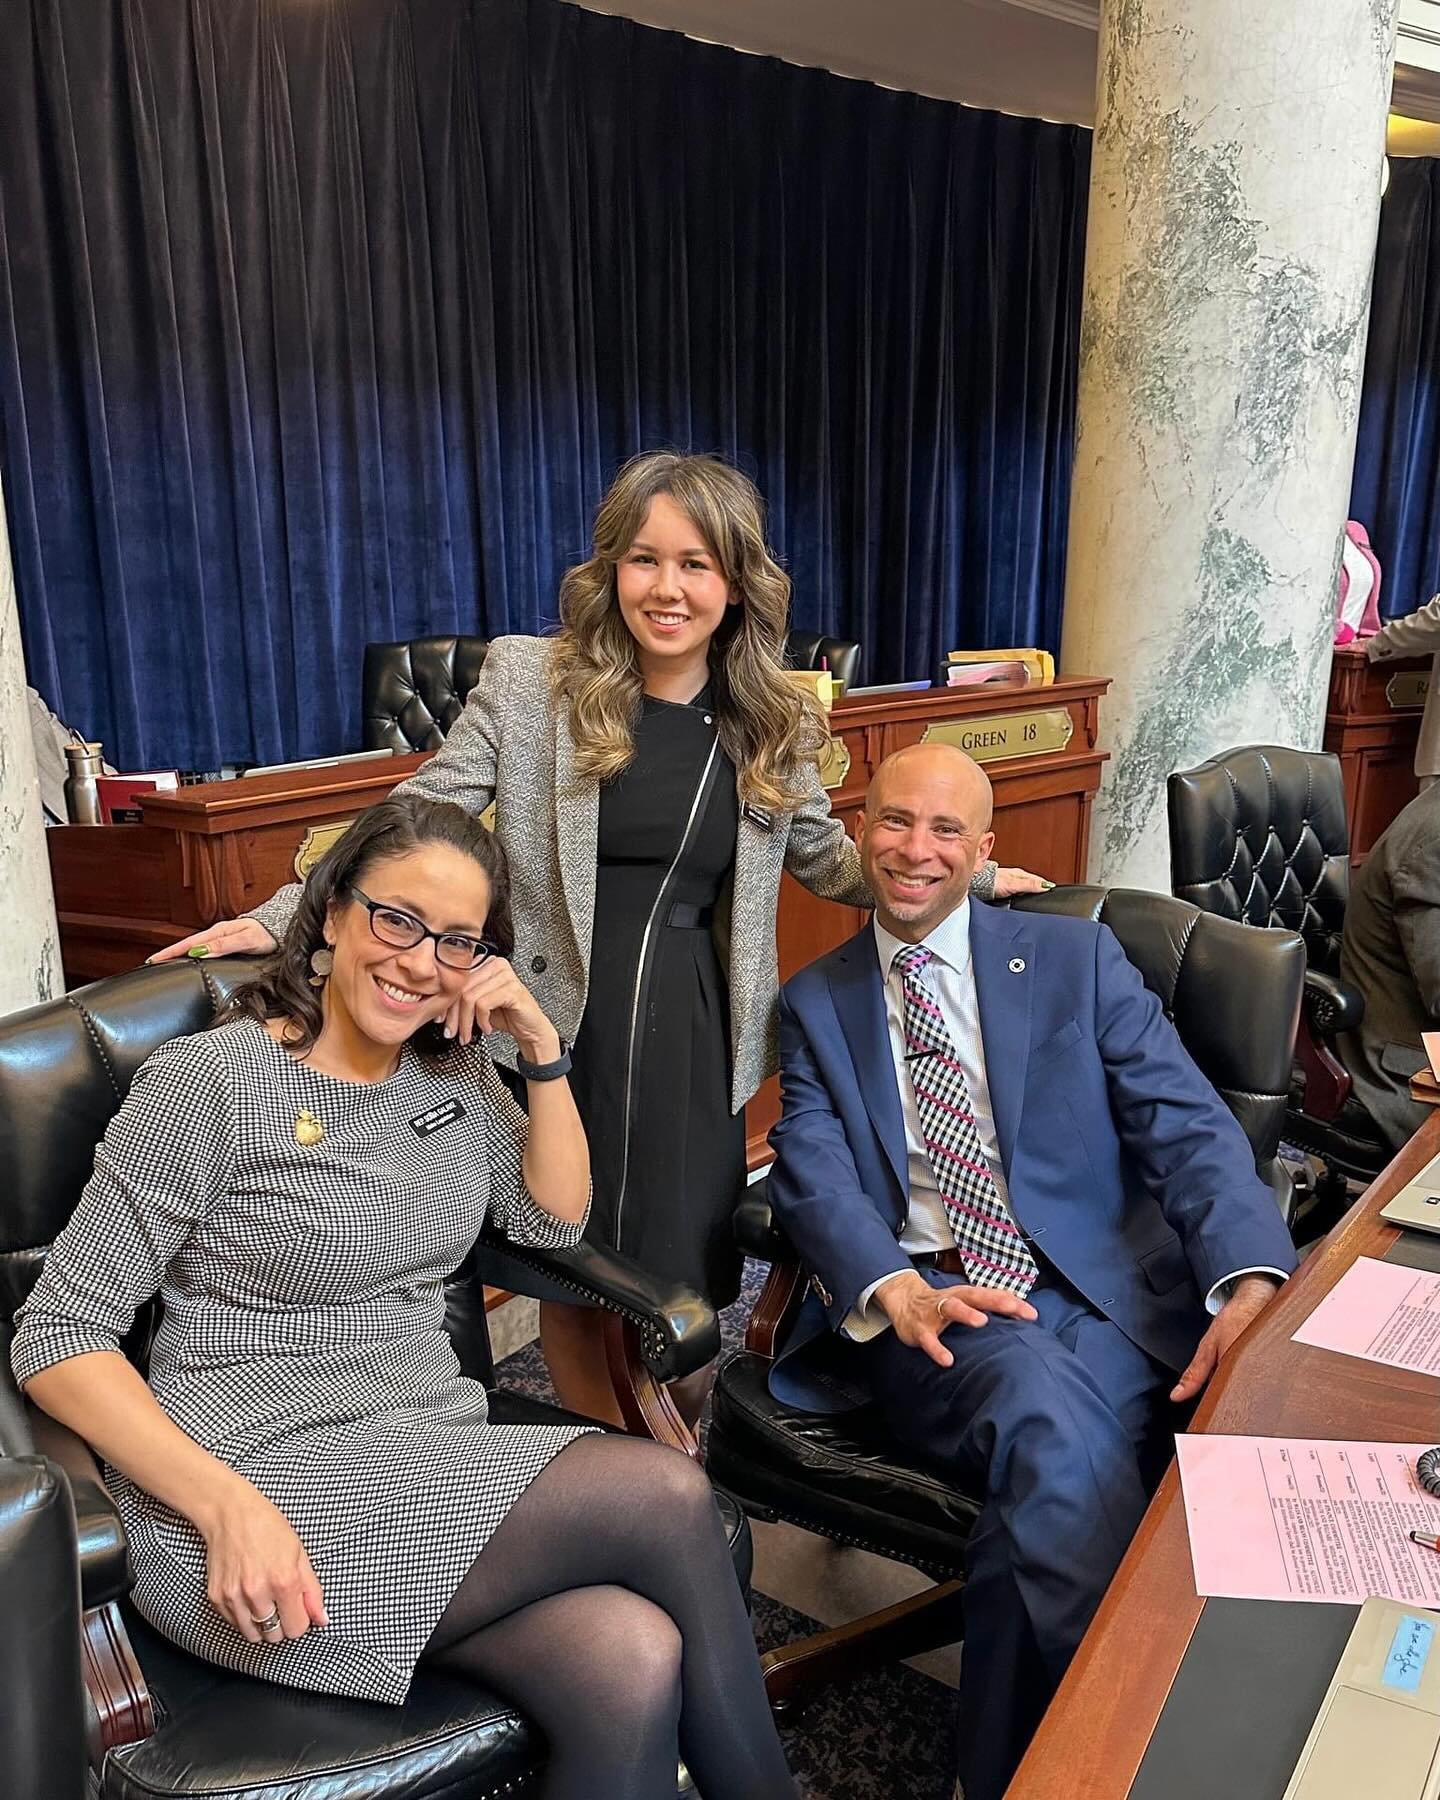 We were at the Statehouse late tonight. It&rsquo;s a lot of hurry up and wait as we pass bills back and forth with the Senate.

We&rsquo;re getting close to wrapping up! Two perks of this evening: Rep. @mathiasforidaho and I have a friend and colleag